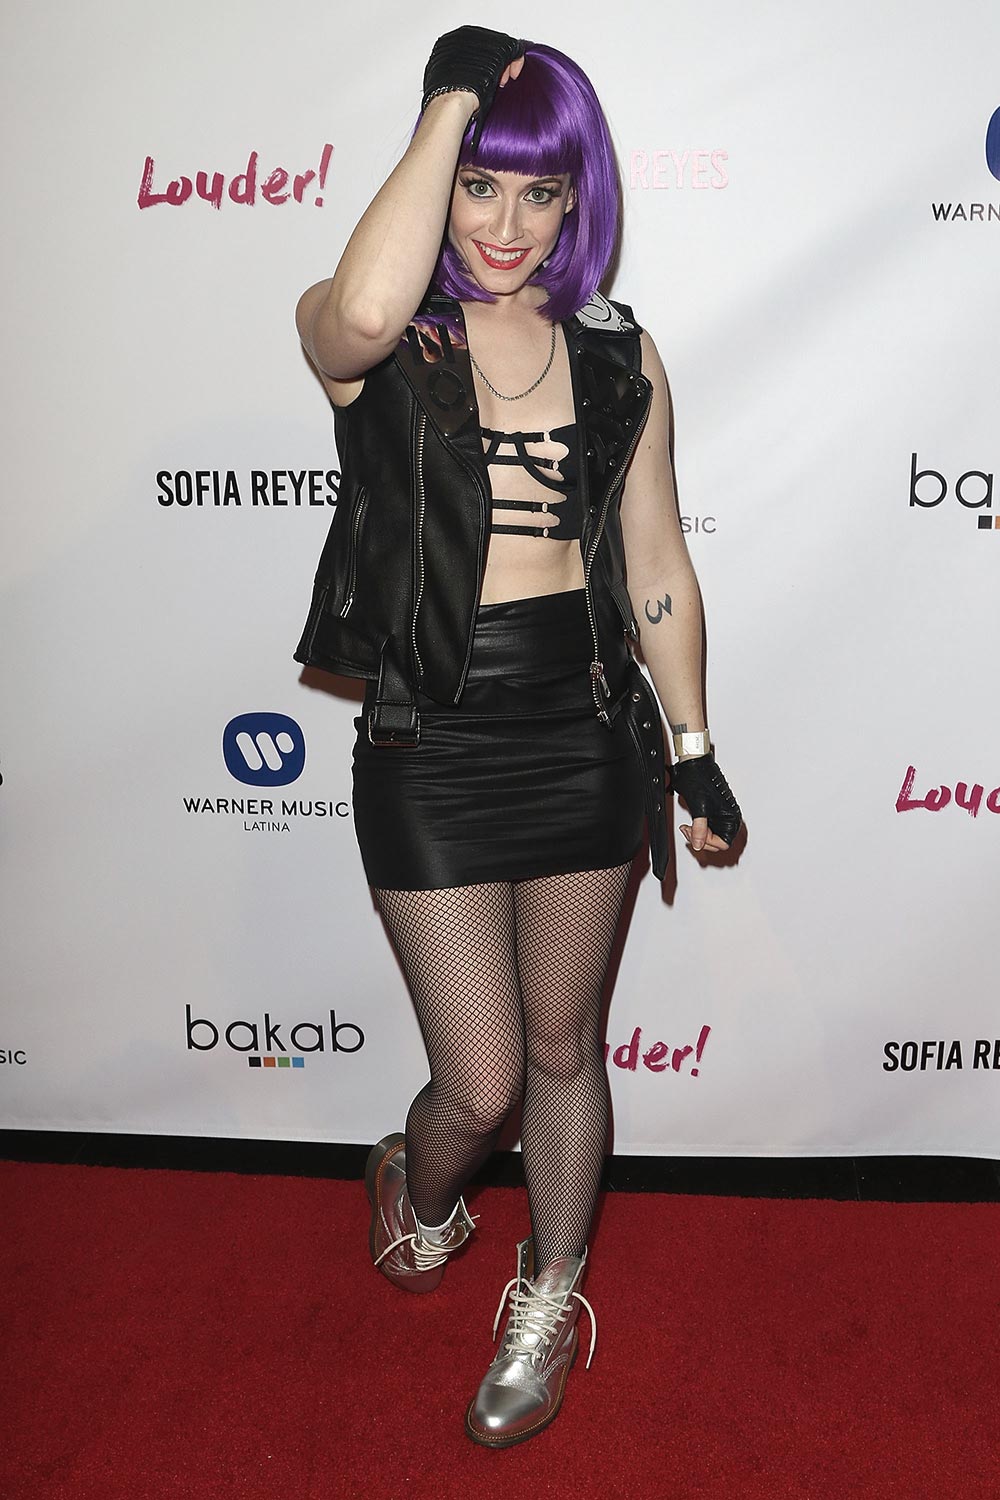 Heather Dawn Bright attends Sofia Reyes album release party